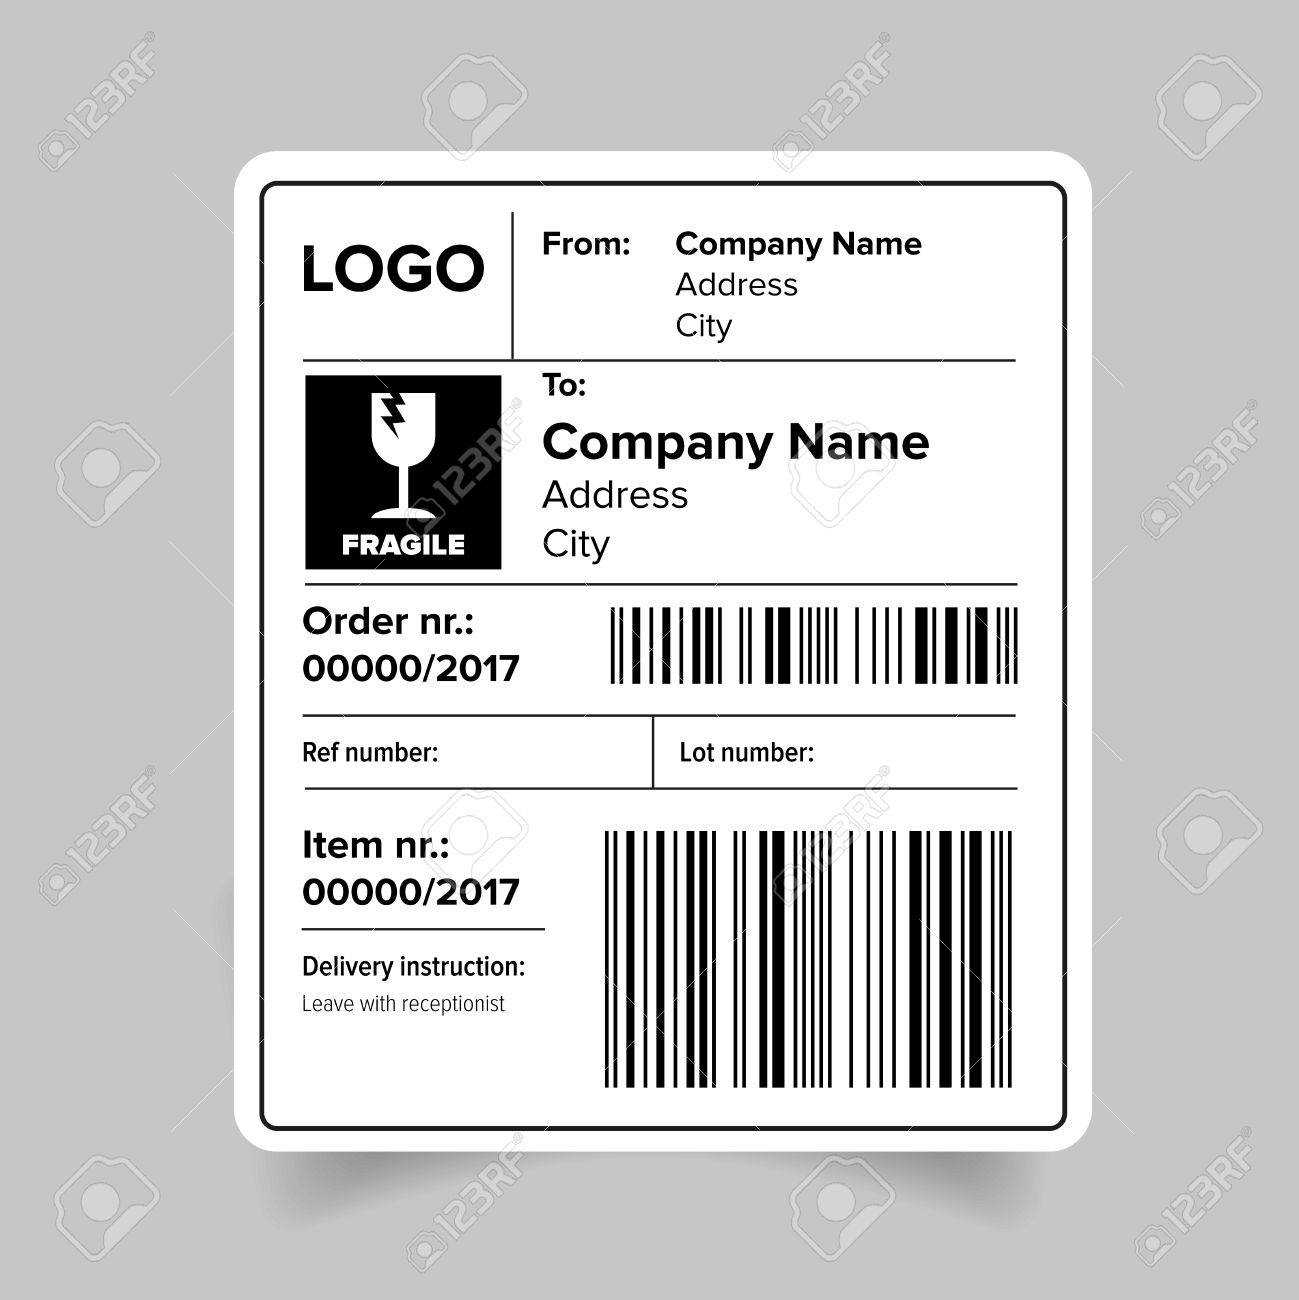 005 Shipping Label Template Free Stupendous Ideas Online With Free Label Templates Online